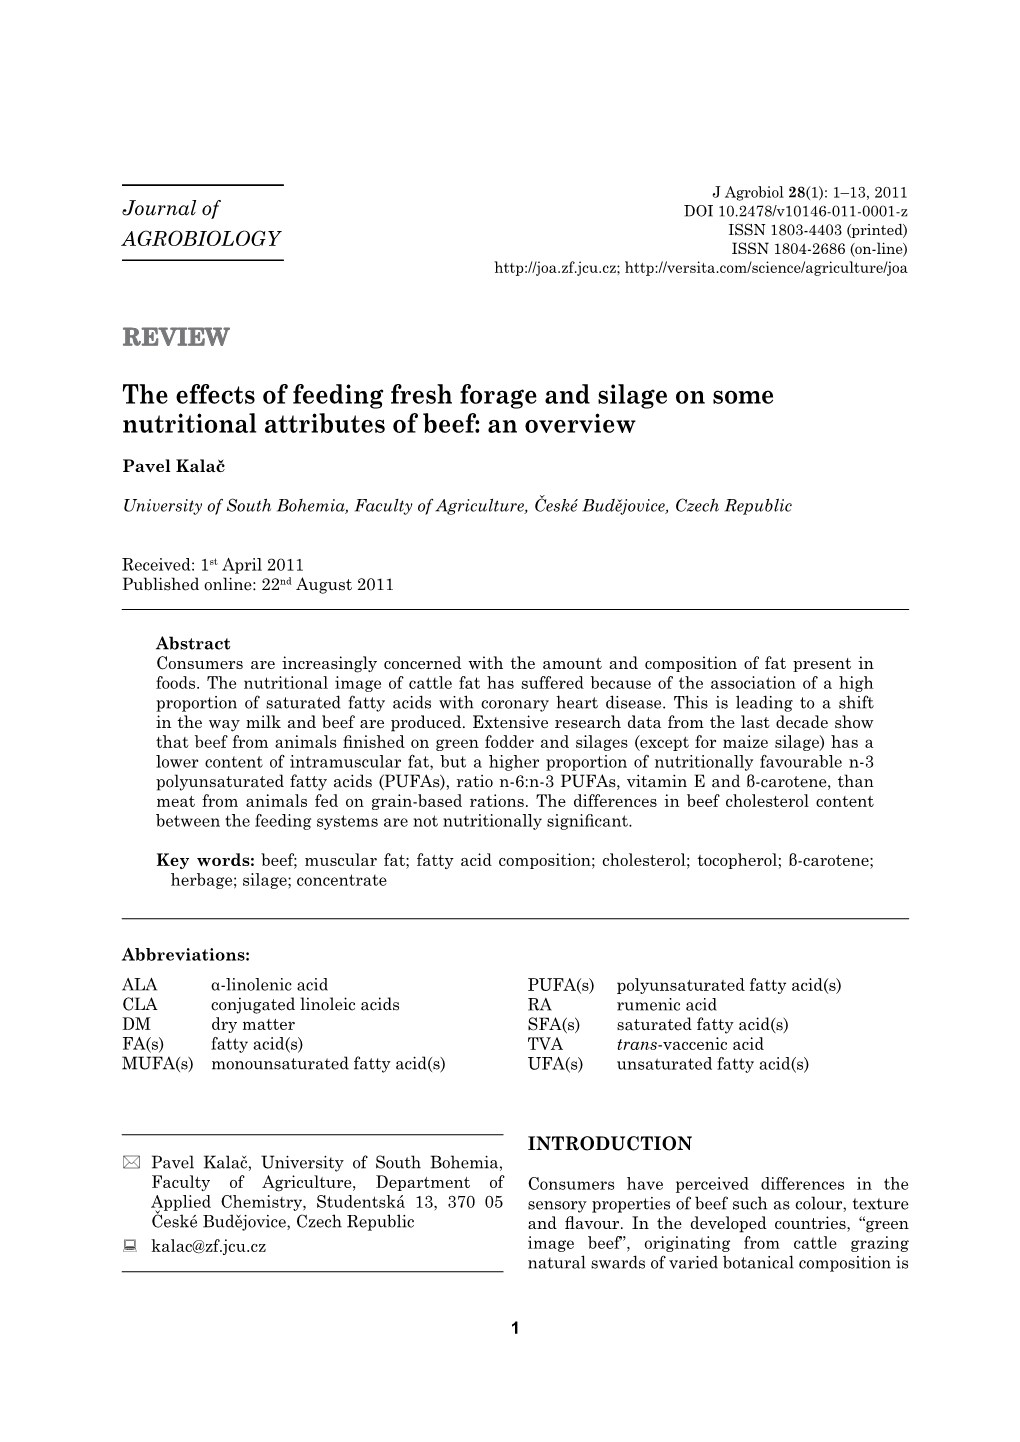 The Effects of Feeding Fresh Forage and Silage on Some Nutritional Attributes of Beef: an Overview